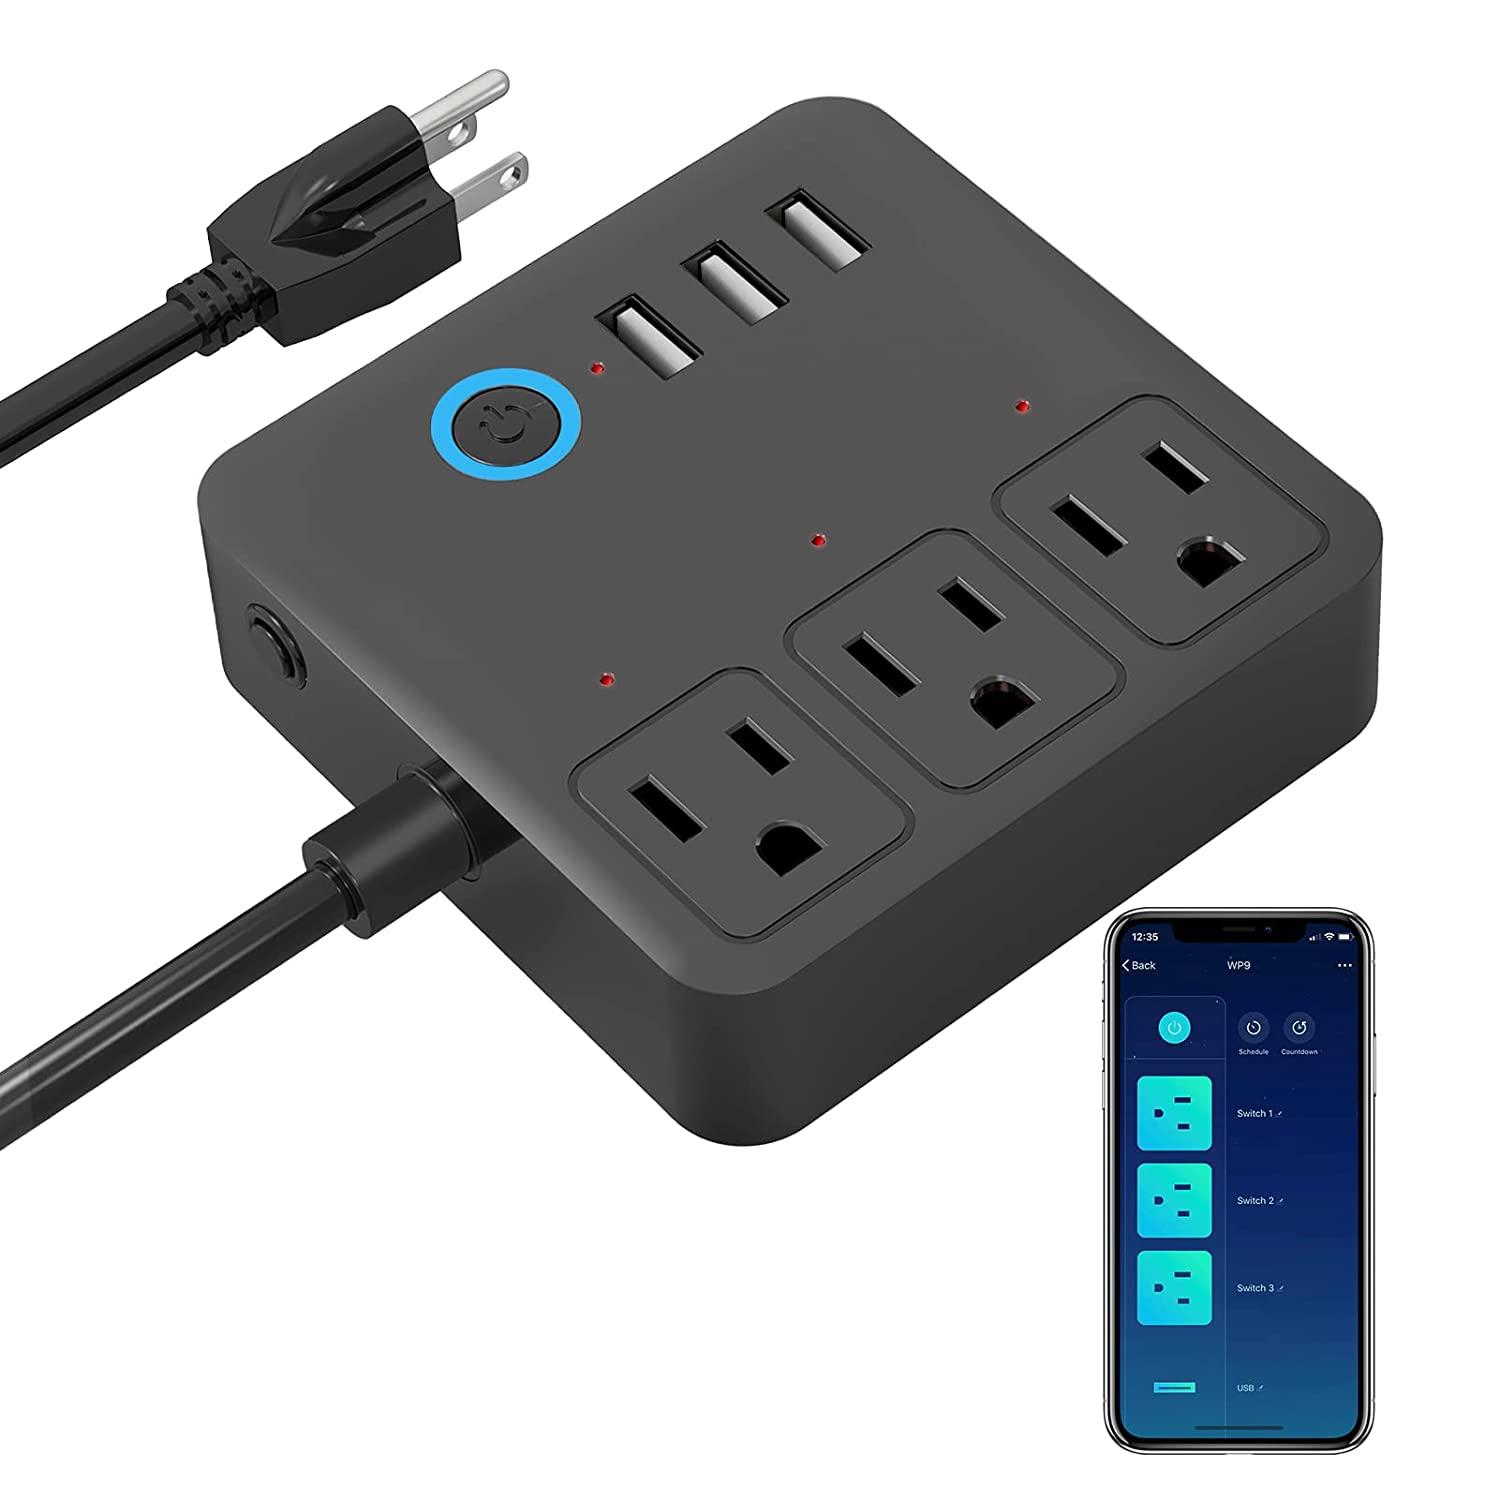 GHome Smart 3-Outlet and 3-USB Port Power Strip for $13.50